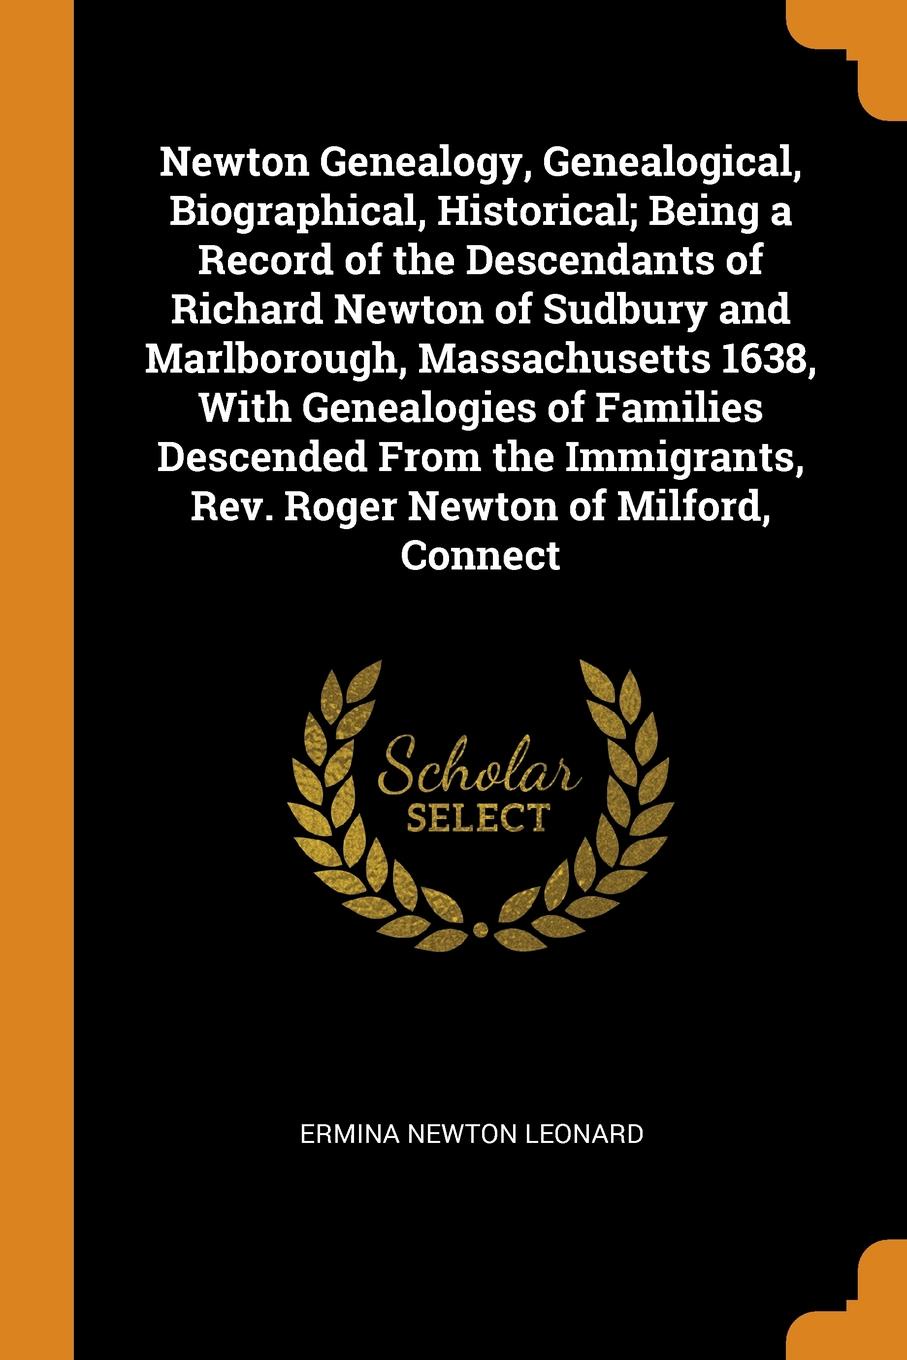 Newton Genealogy, Genealogical, Biographical, Historical; Being a Record of the Descendants of Richard Newton of Sudbury and Marlborough, Massachusetts 1638, With Genealogies of Families Descended From the Immigrants, Rev. Roger Newton of Milford,...